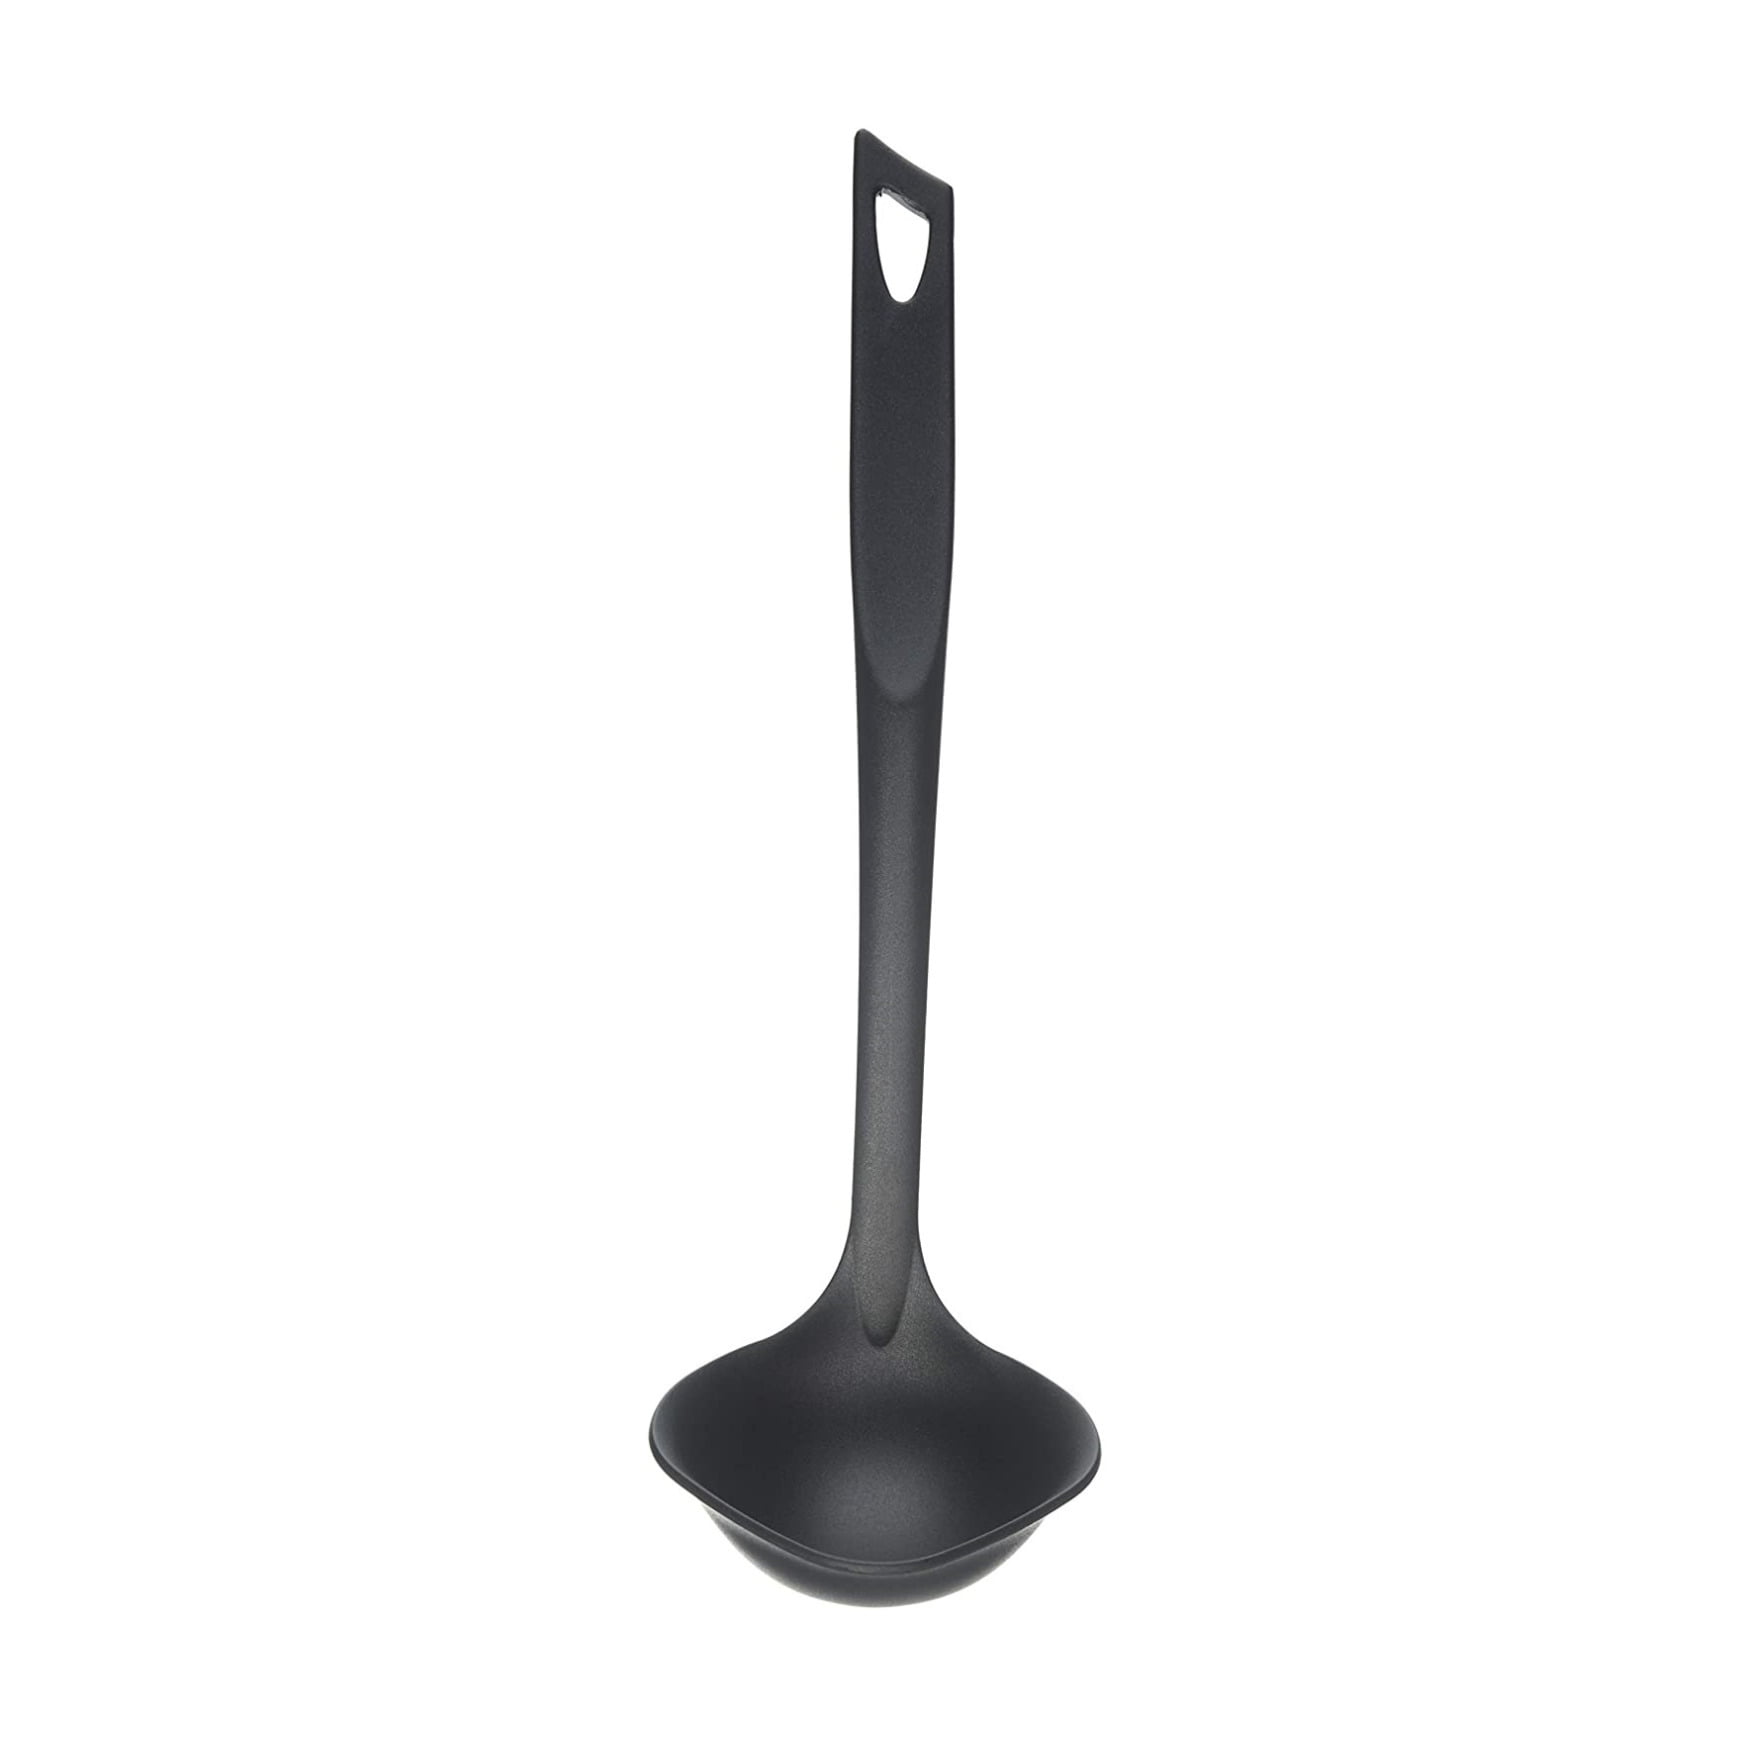 Norpro Soup Ladle - Silicone and Stainless Steel